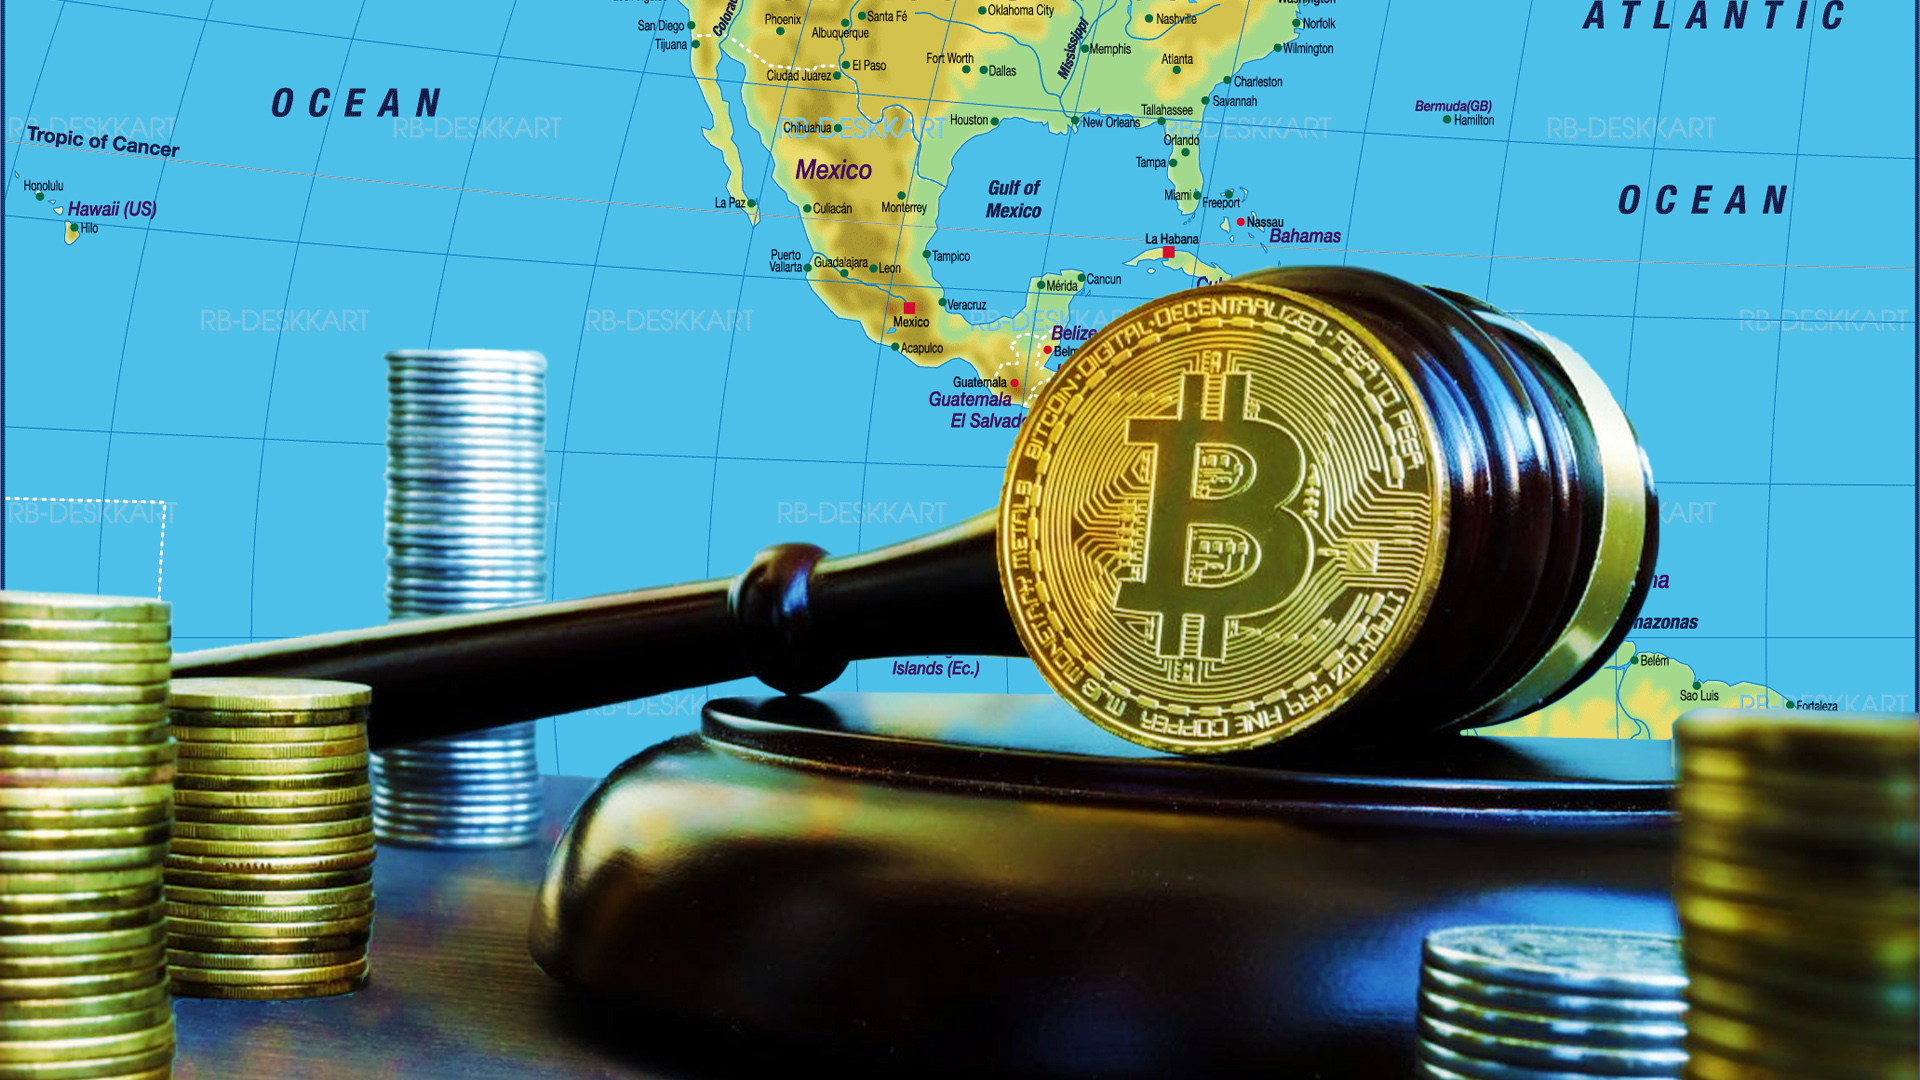 Cryptocurrencies Regulations in the Americas